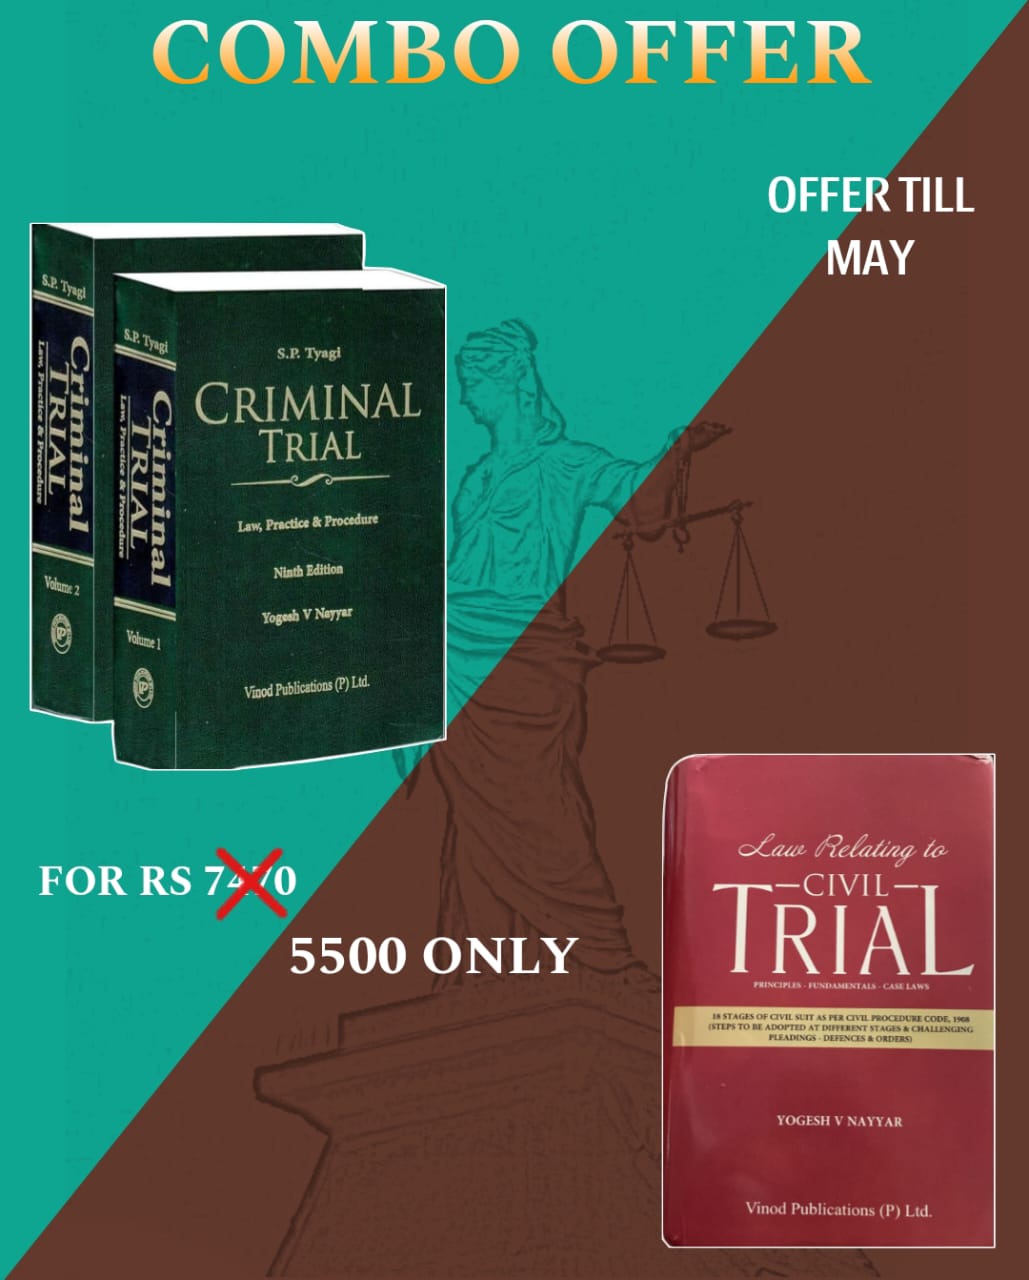 Civil And Criminal Trail Combo Offer